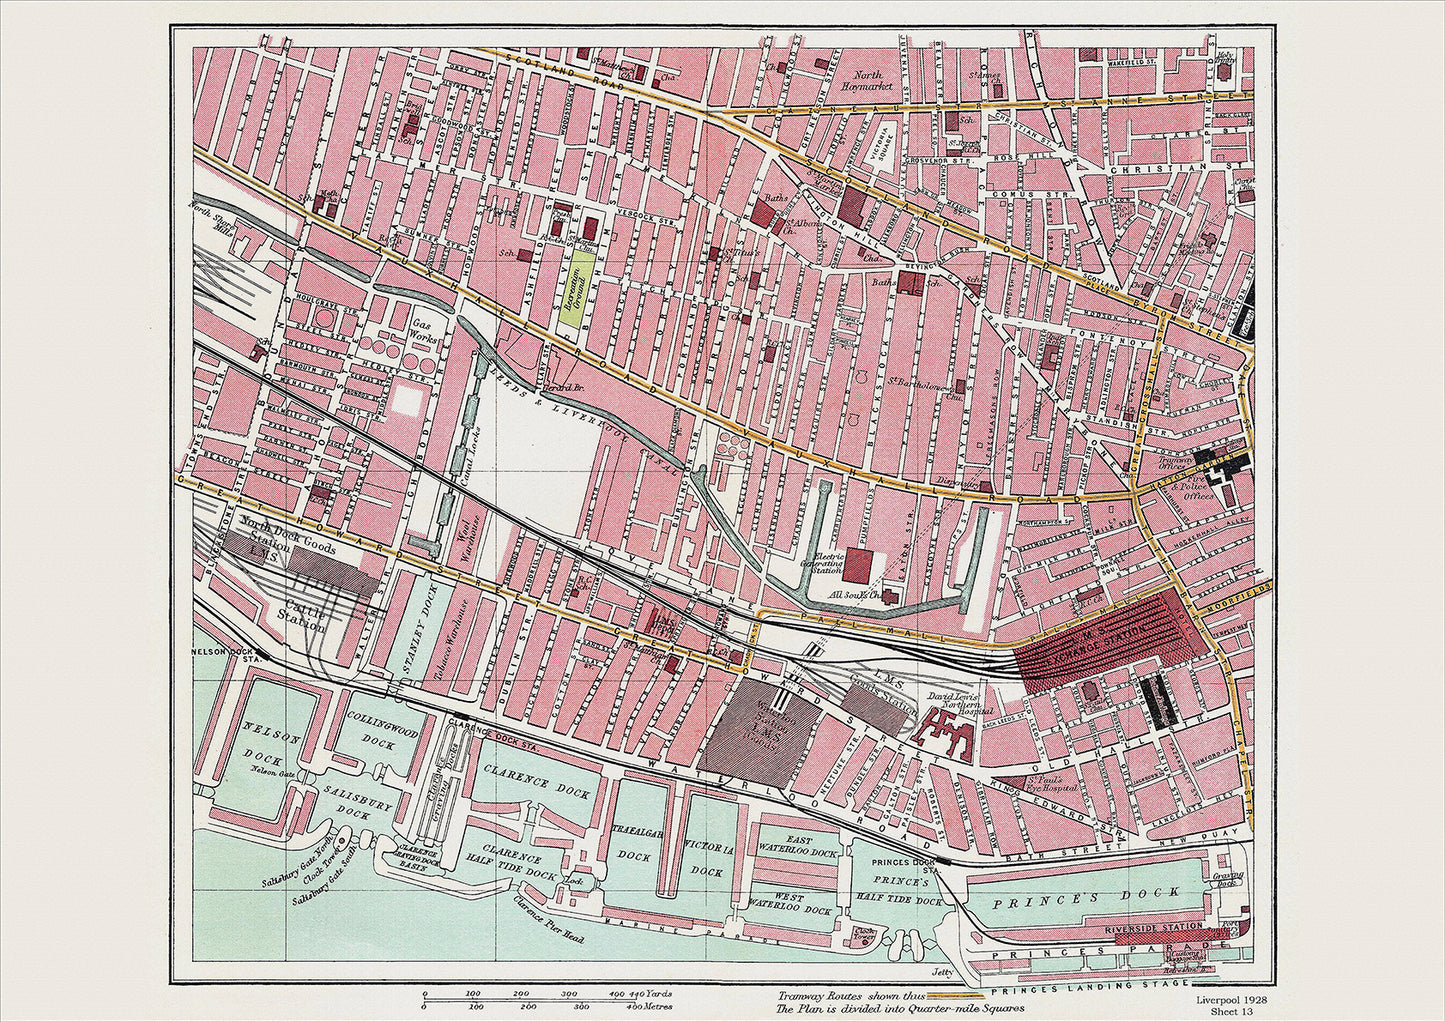 Liverpool in 1928 Series - showing Great Howard Street area (Liv1928-13)